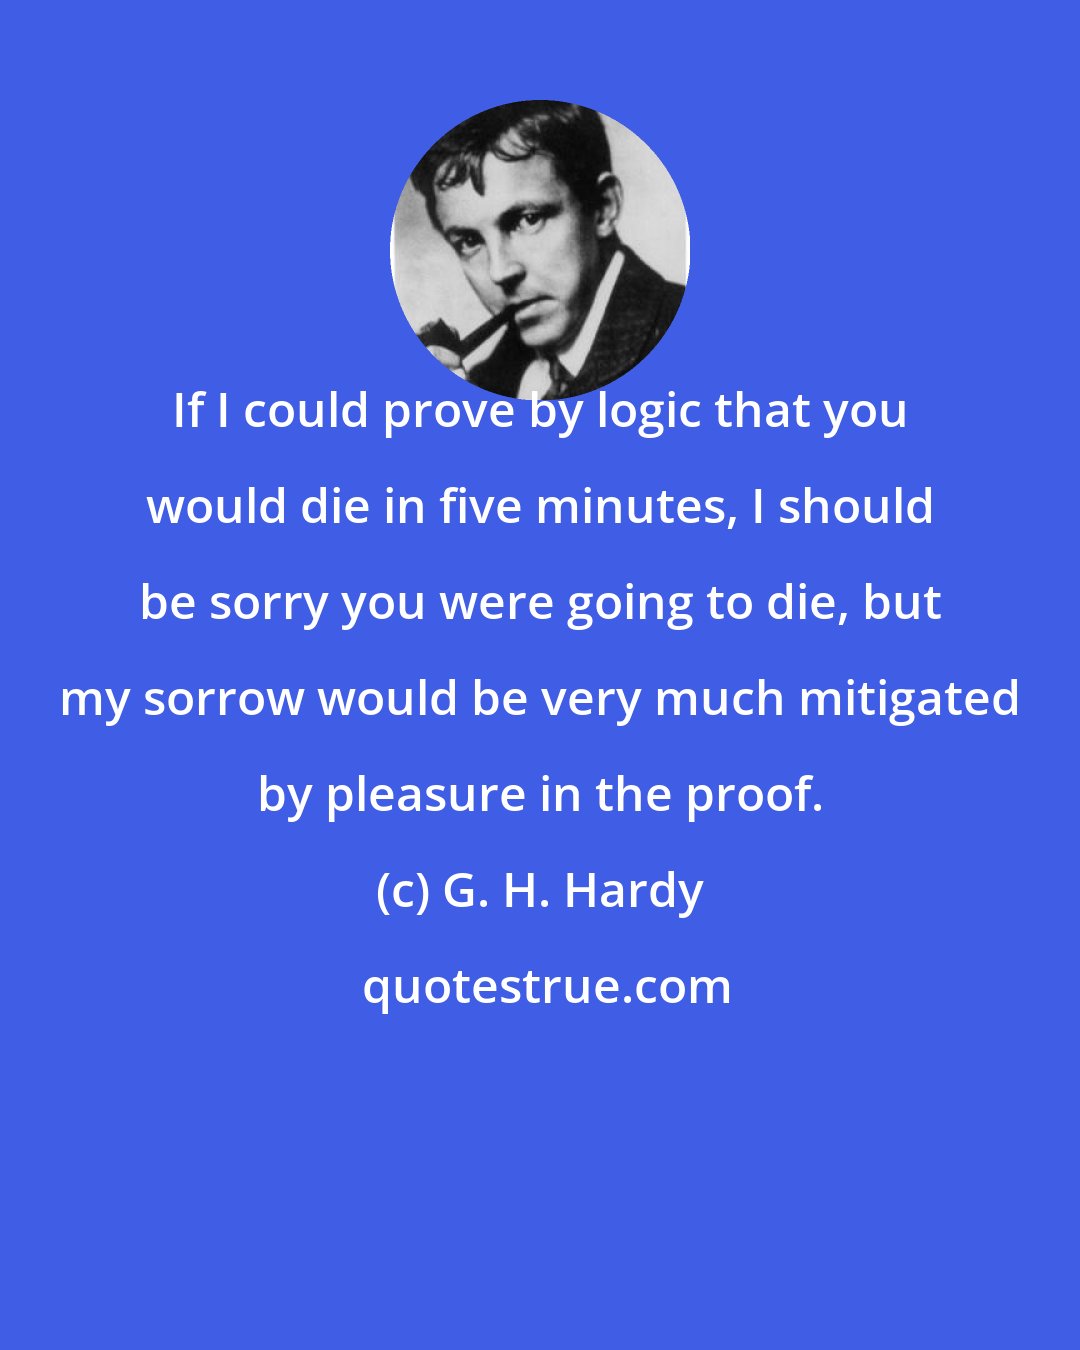 G. H. Hardy: If I could prove by logic that you would die in five minutes, I should be sorry you were going to die, but my sorrow would be very much mitigated by pleasure in the proof.